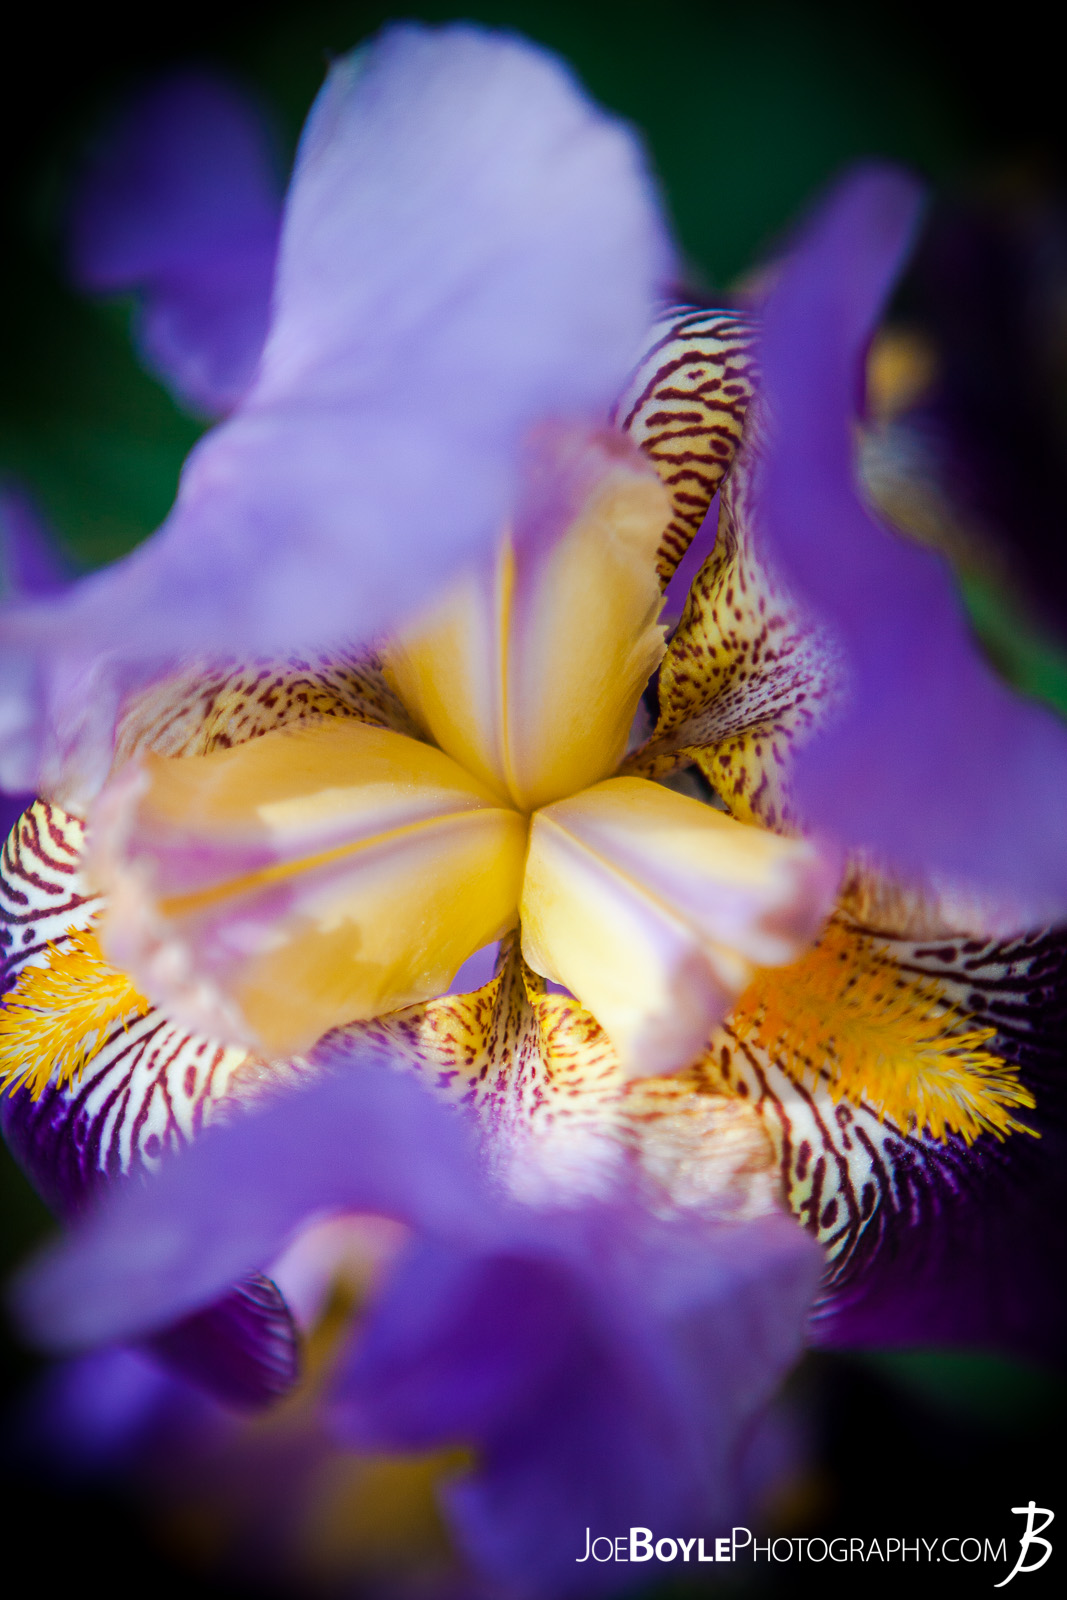 Buy Flowers Bearded Iris From The Top Looking Down Photo Print Options